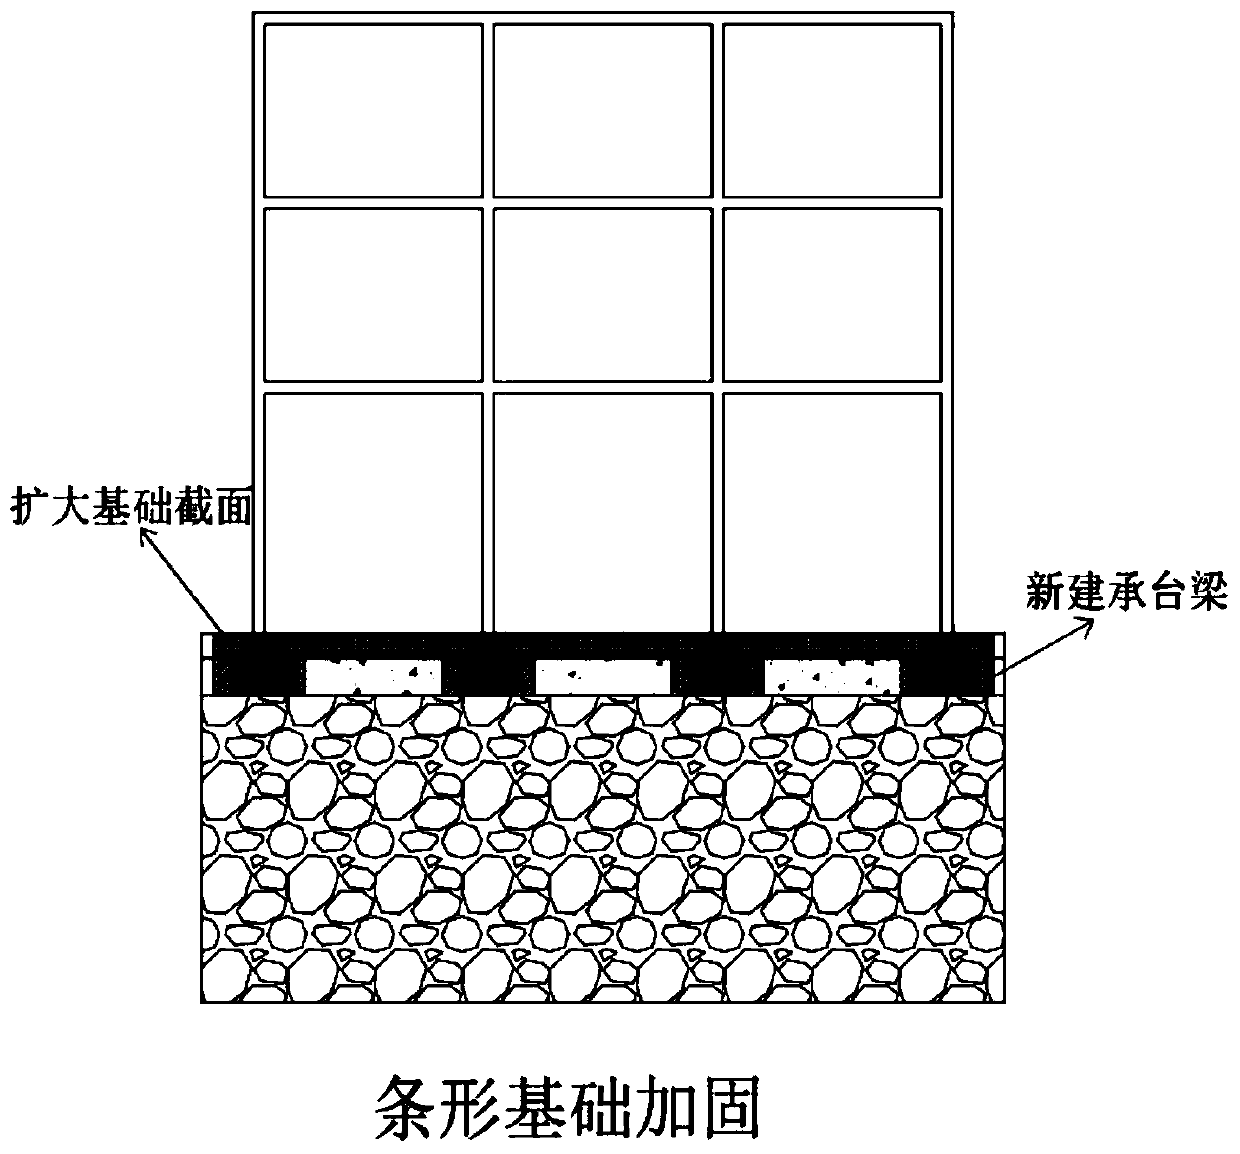 A special device and construction method for foundation underpinning under strip foundation